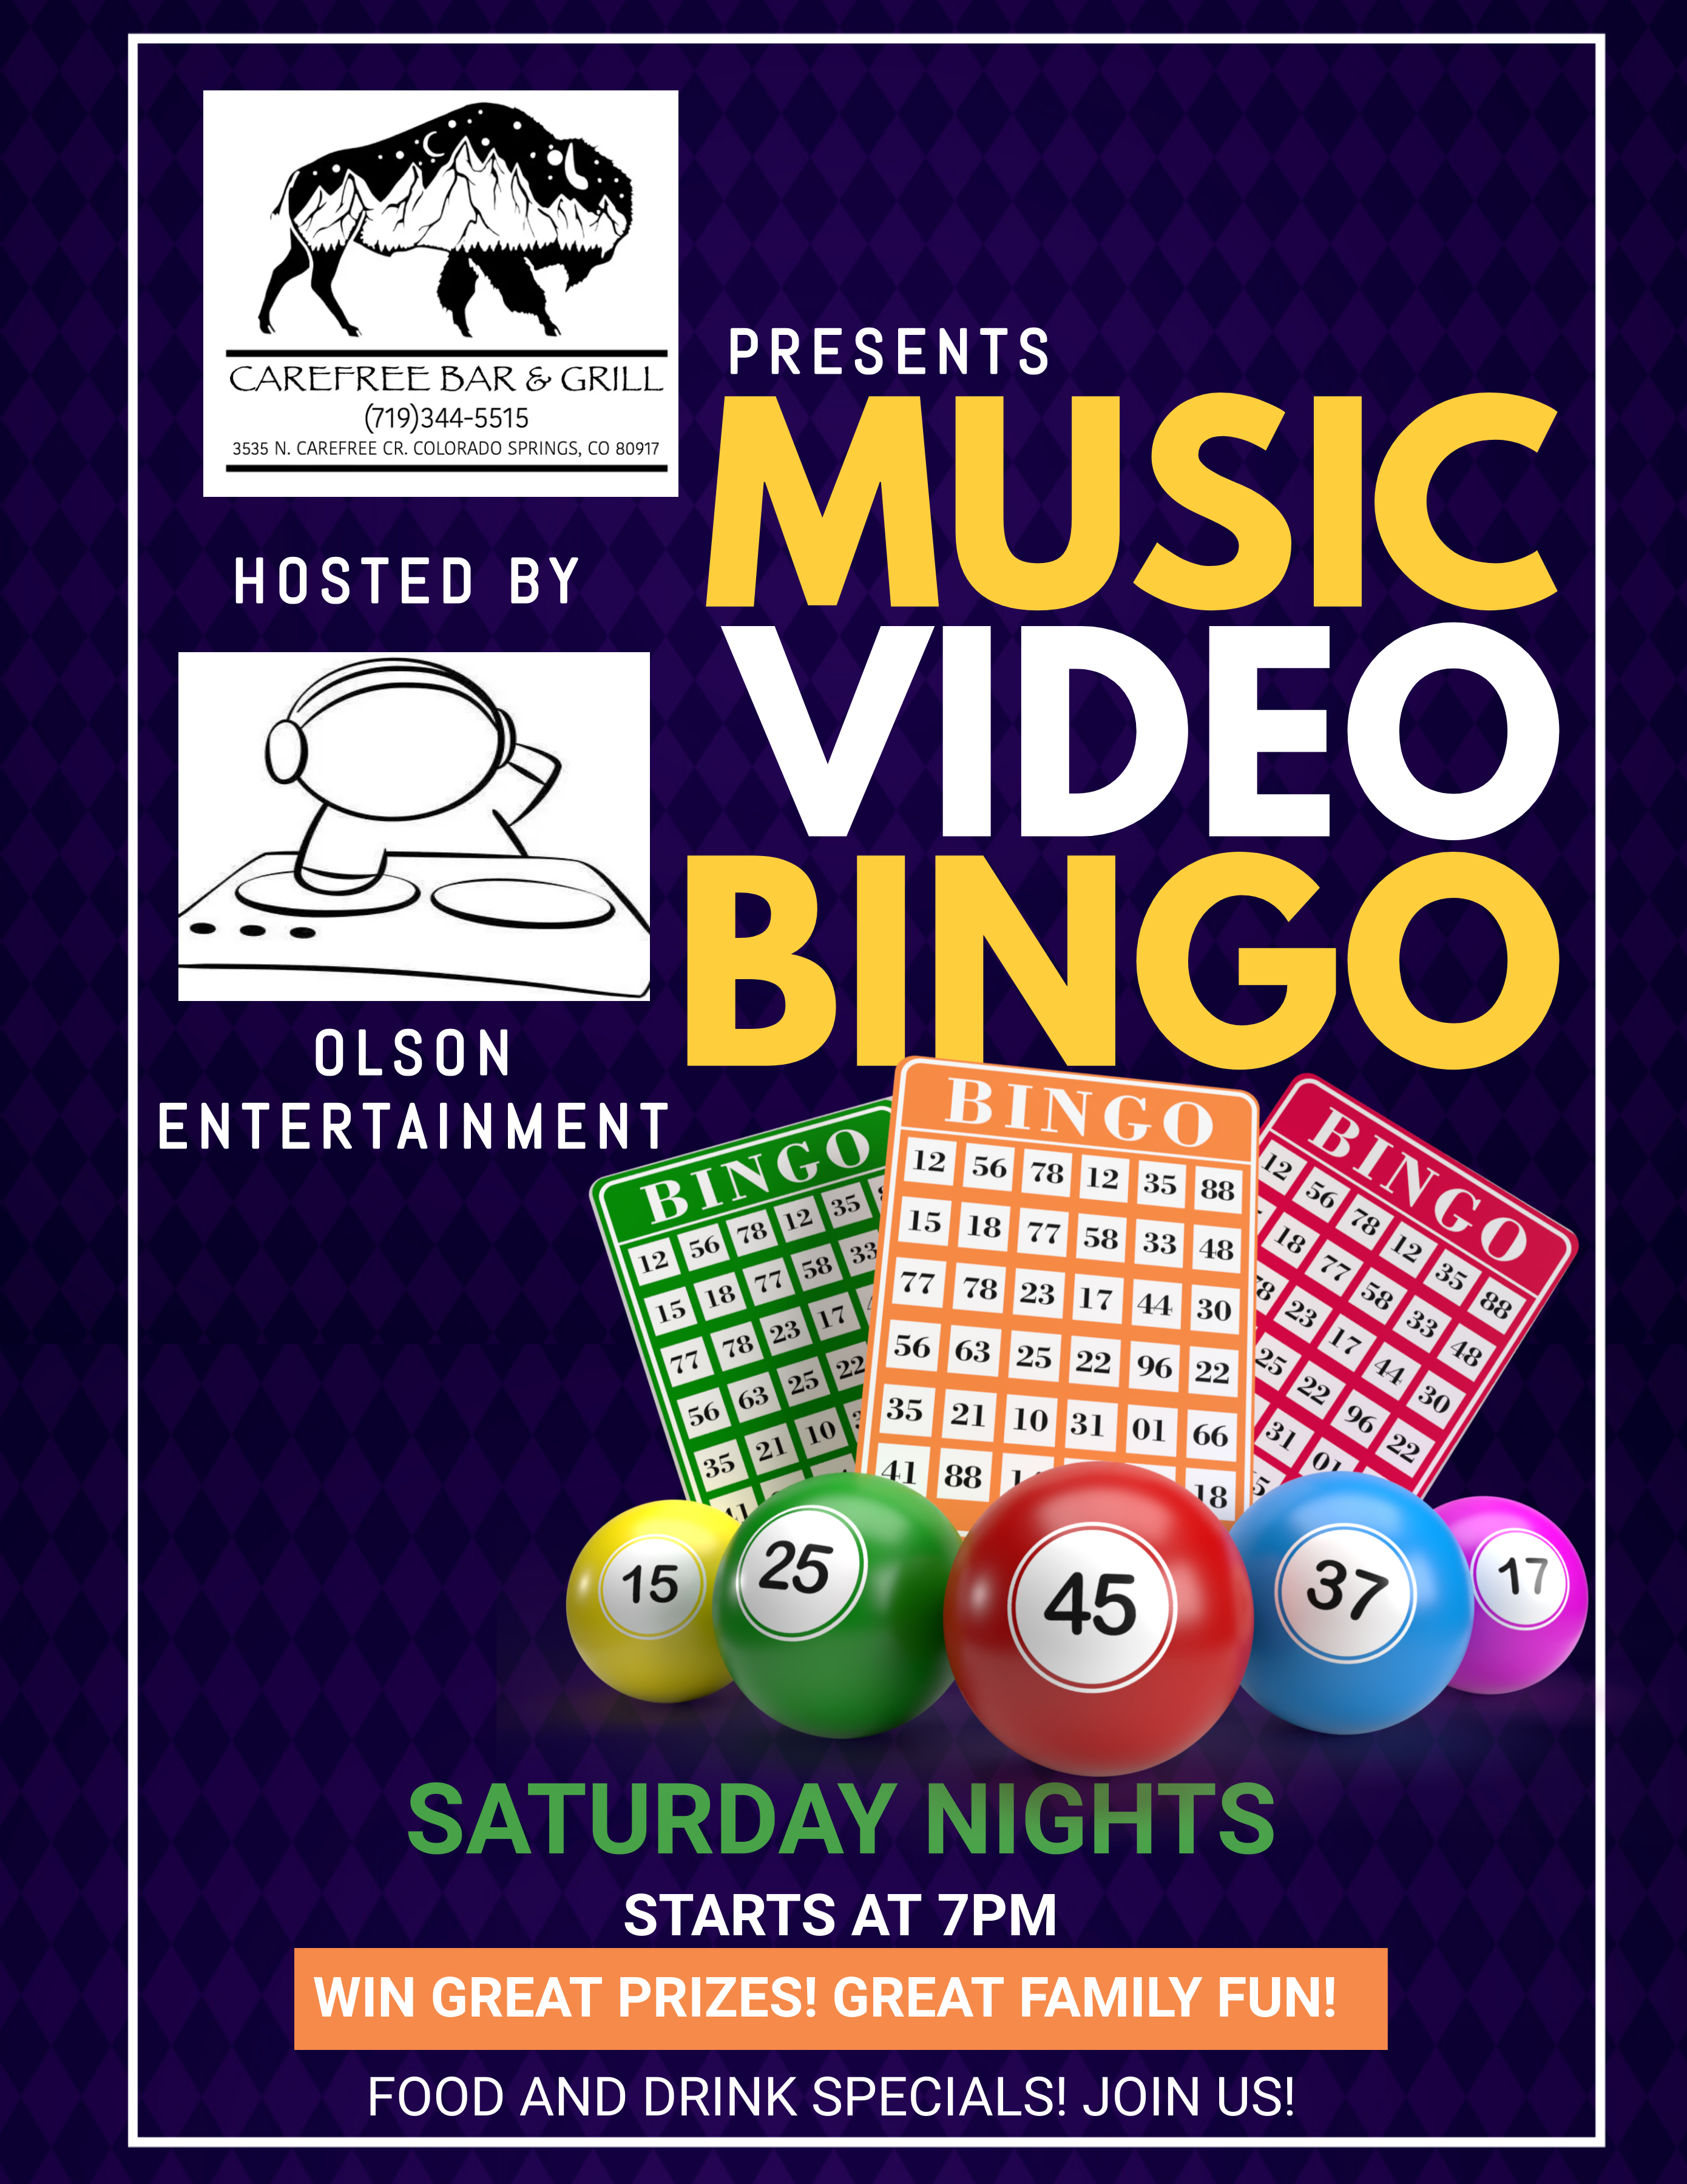 Music Video Bingo at Carefree Bar & Grill in Colorado Springs, CO